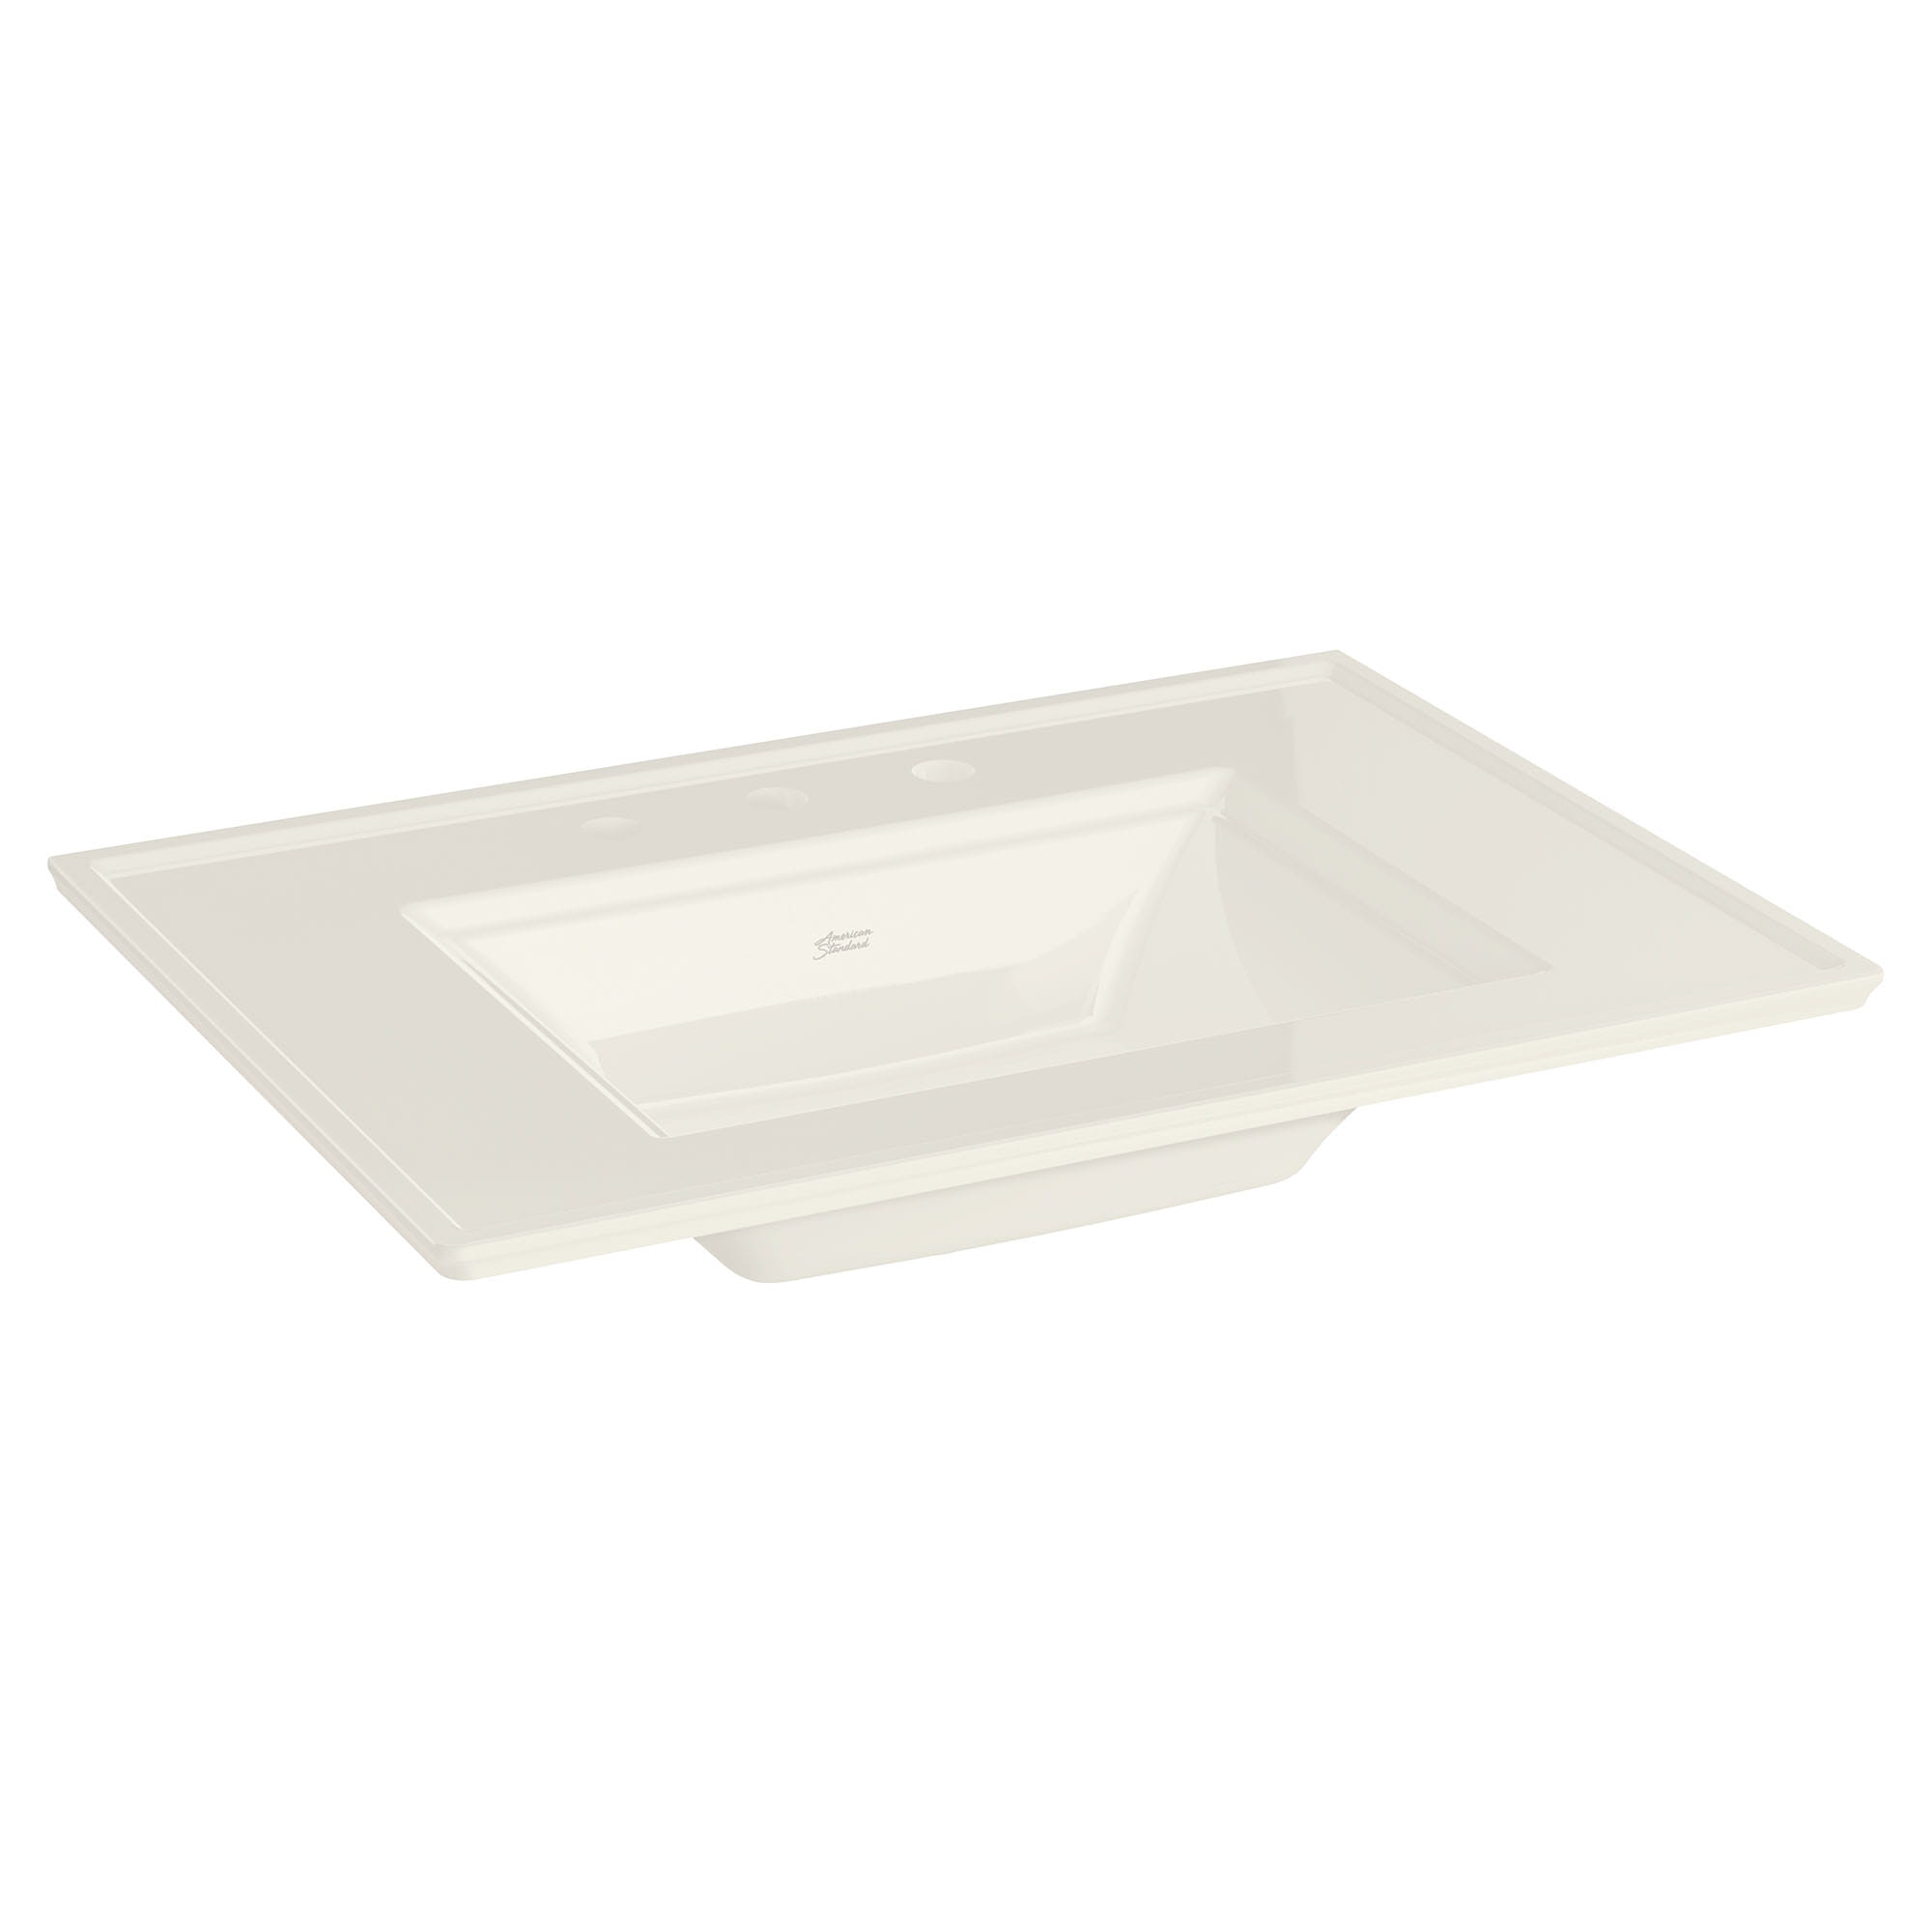 Town Square® S Vanity Top with 8-Inch Widespread